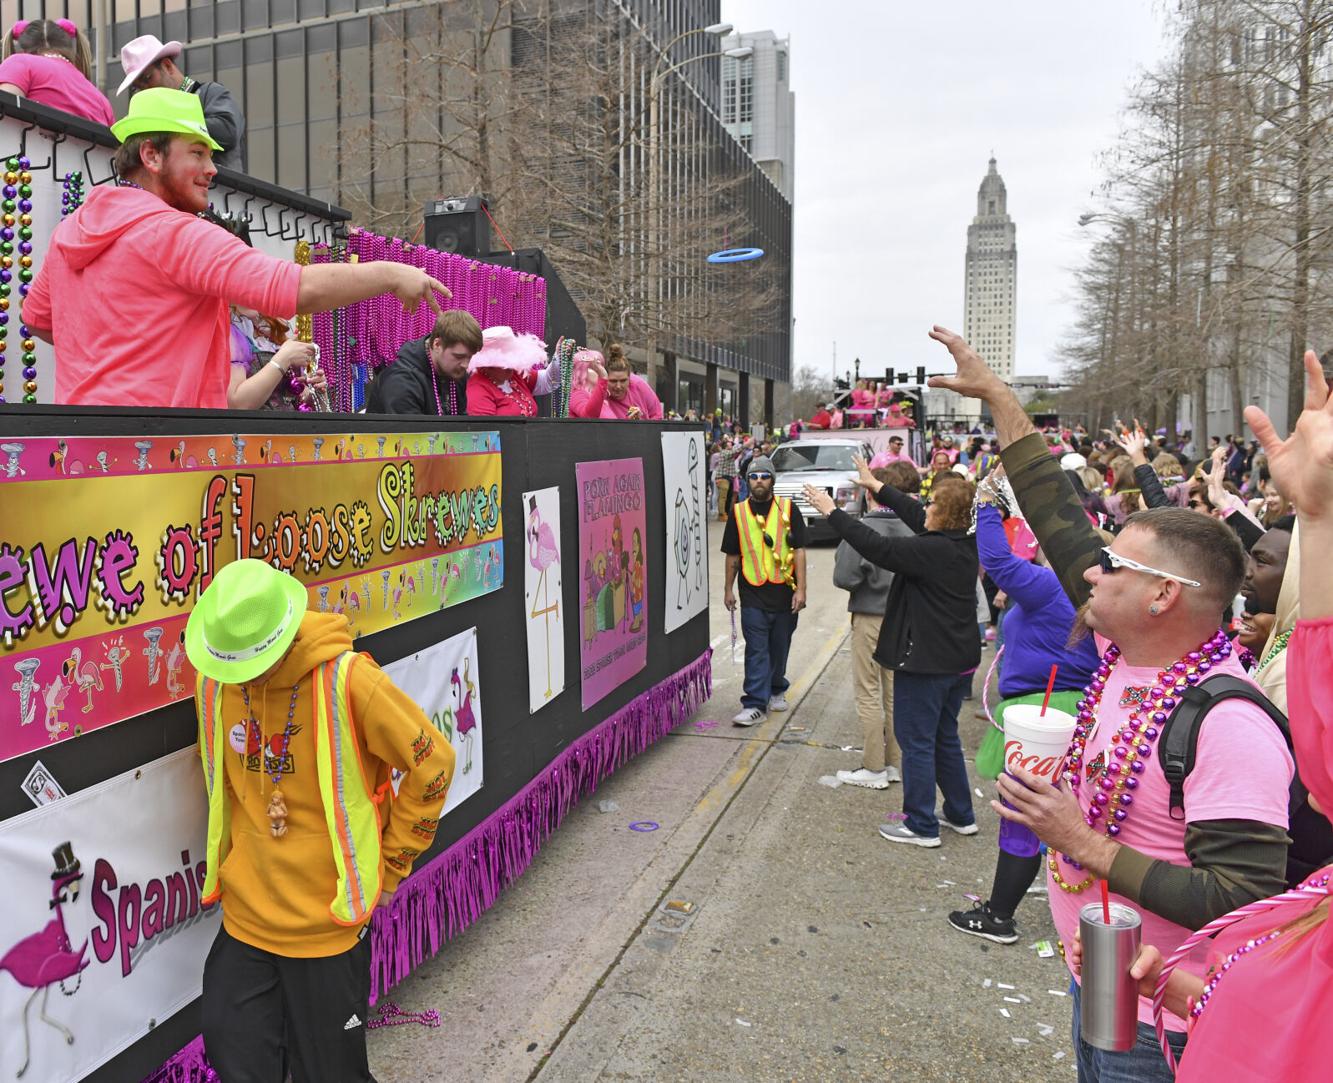 Baton Rouge has Mardi Gras parades, but why doesn't it have any on Fat